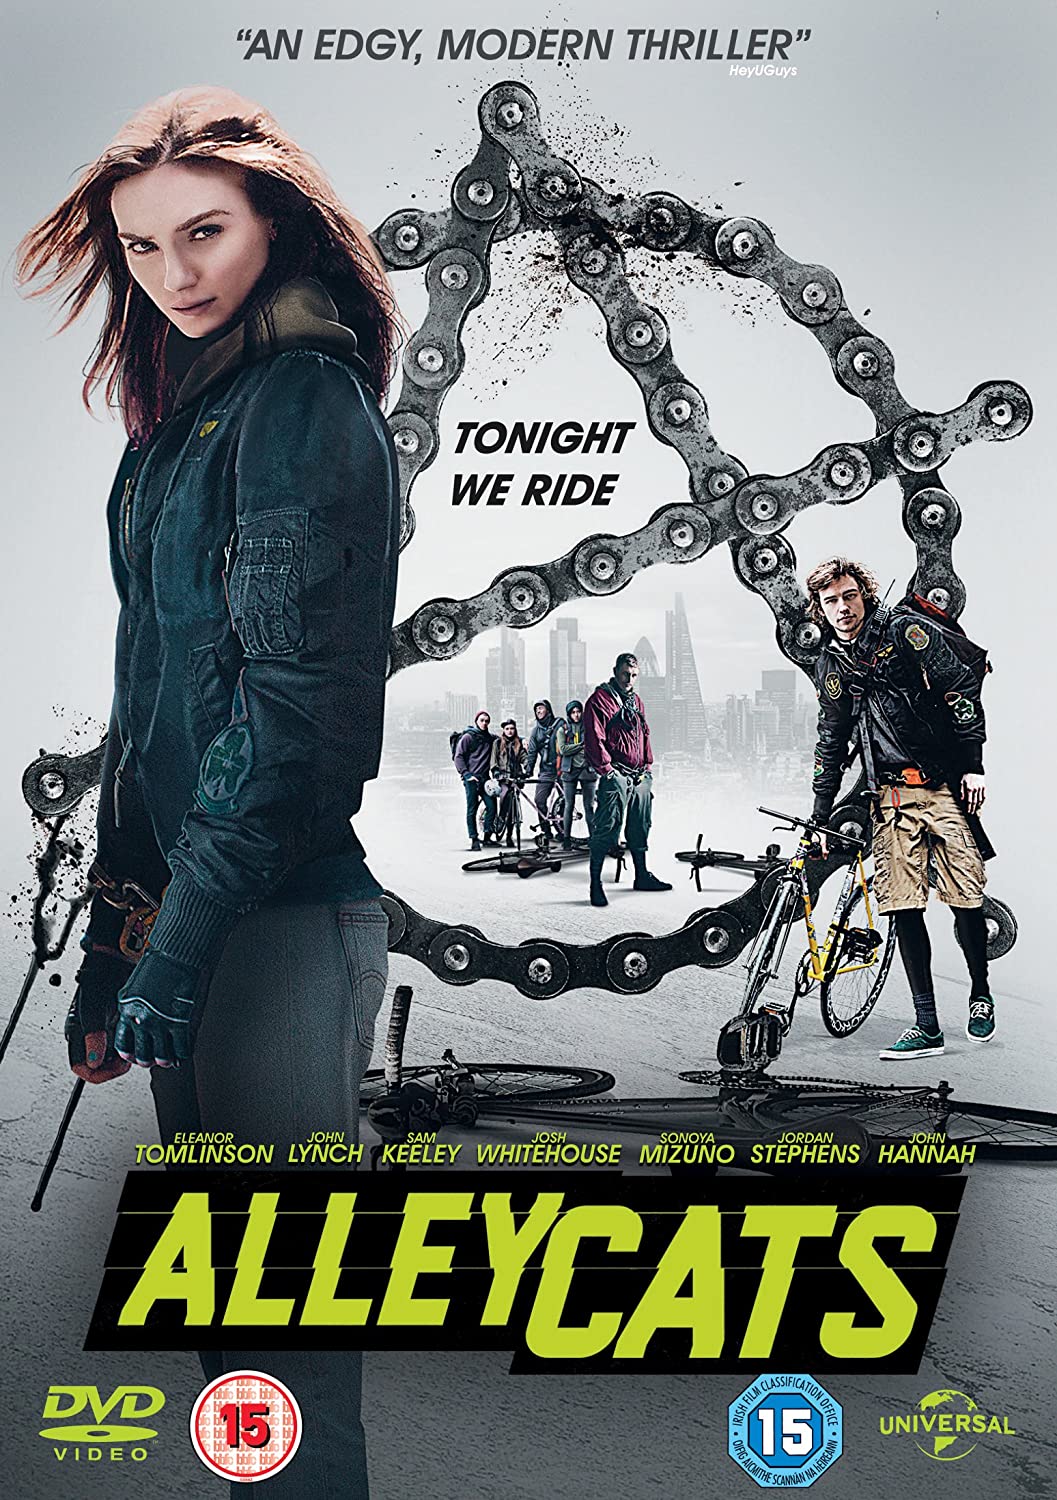 Alleycats (DVD)